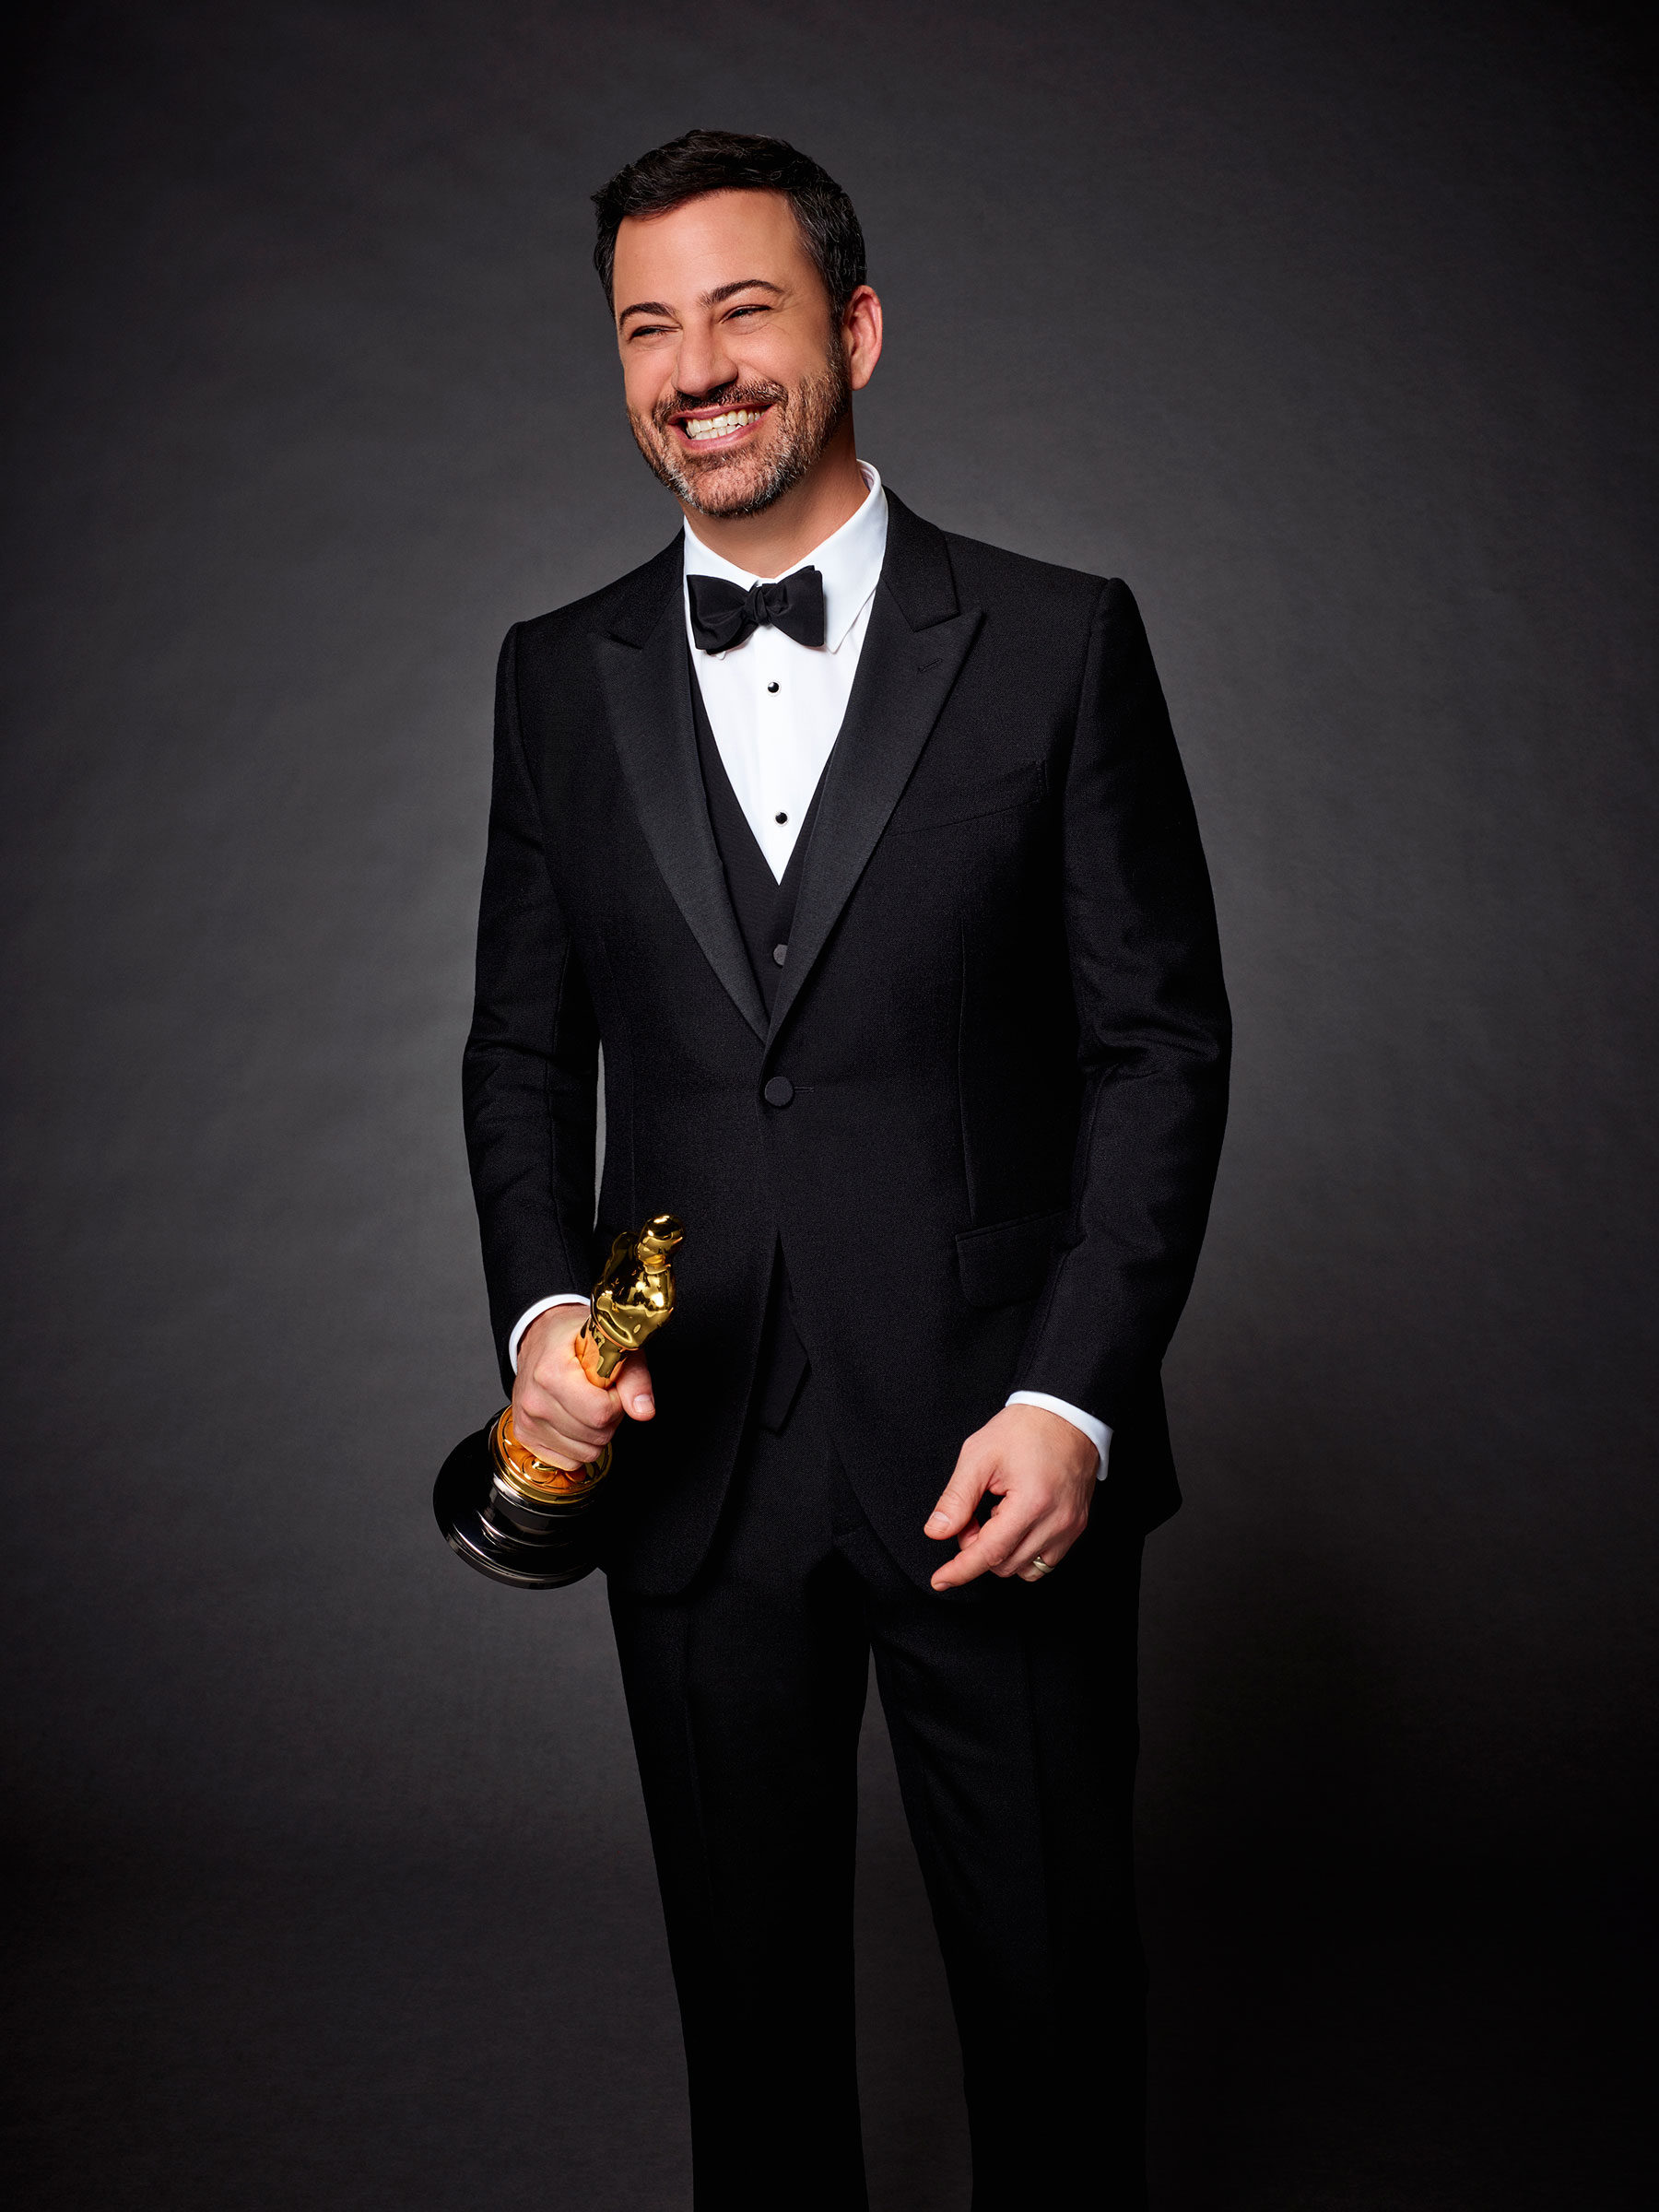 Late-night talk show host, producer and comedian Jimmy Kimmel will host the 89th Oscars® to be broadcast live on Oscar® SUNDAY, FEBRUARY 26, 2017, on the ABC Television Network. (Photo: ABC/Jeff Lipsky)